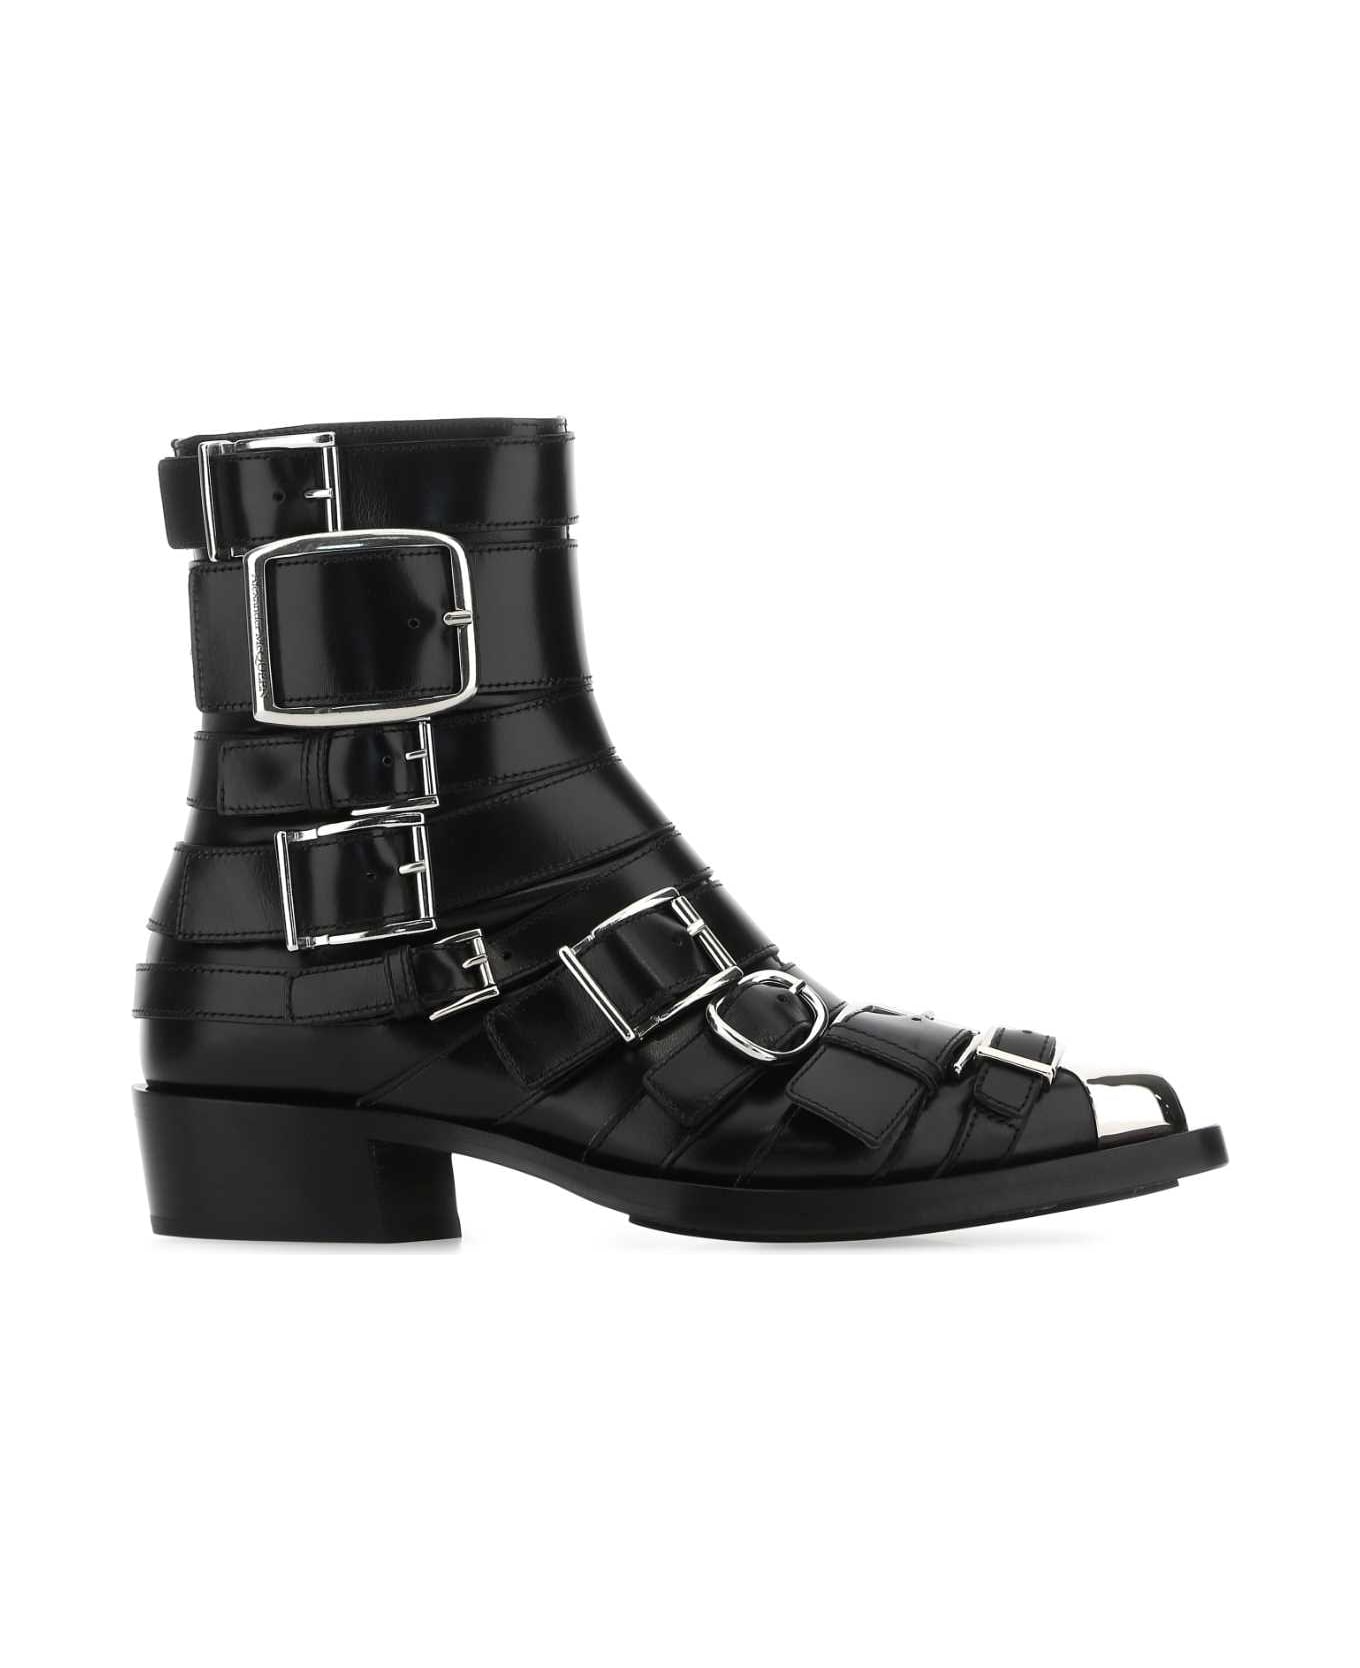 Alexander McQueen Black Leather Punk Ankle Boots - 1081